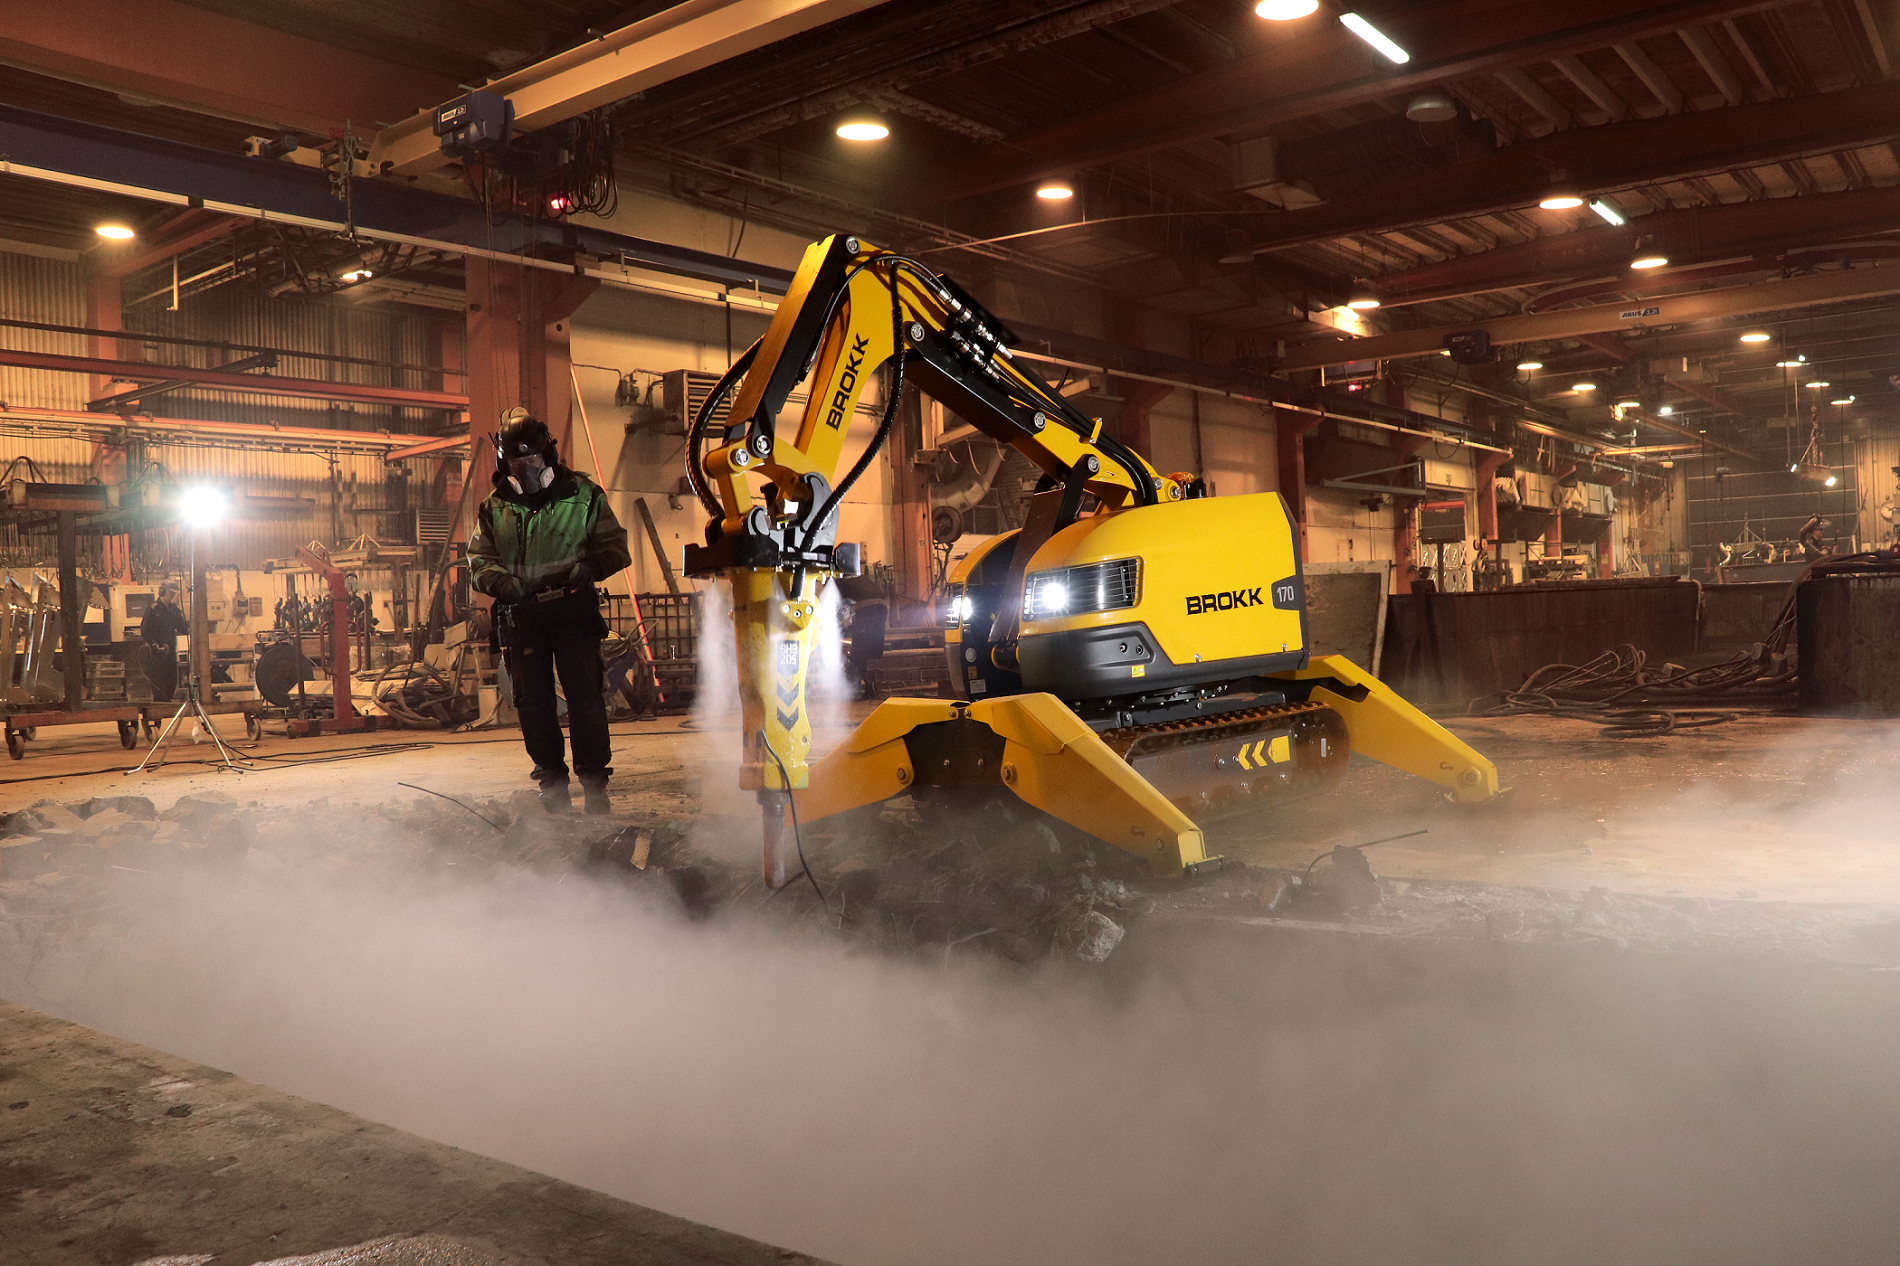 Brokk Water Mist Dust Suppression System produces atomized fog that effectively binds airborne dust particles while also providing ground-level dust suppression. Additionally, the mist dissipates, rather than forming puddles, for a safer, cleaner jobsite.